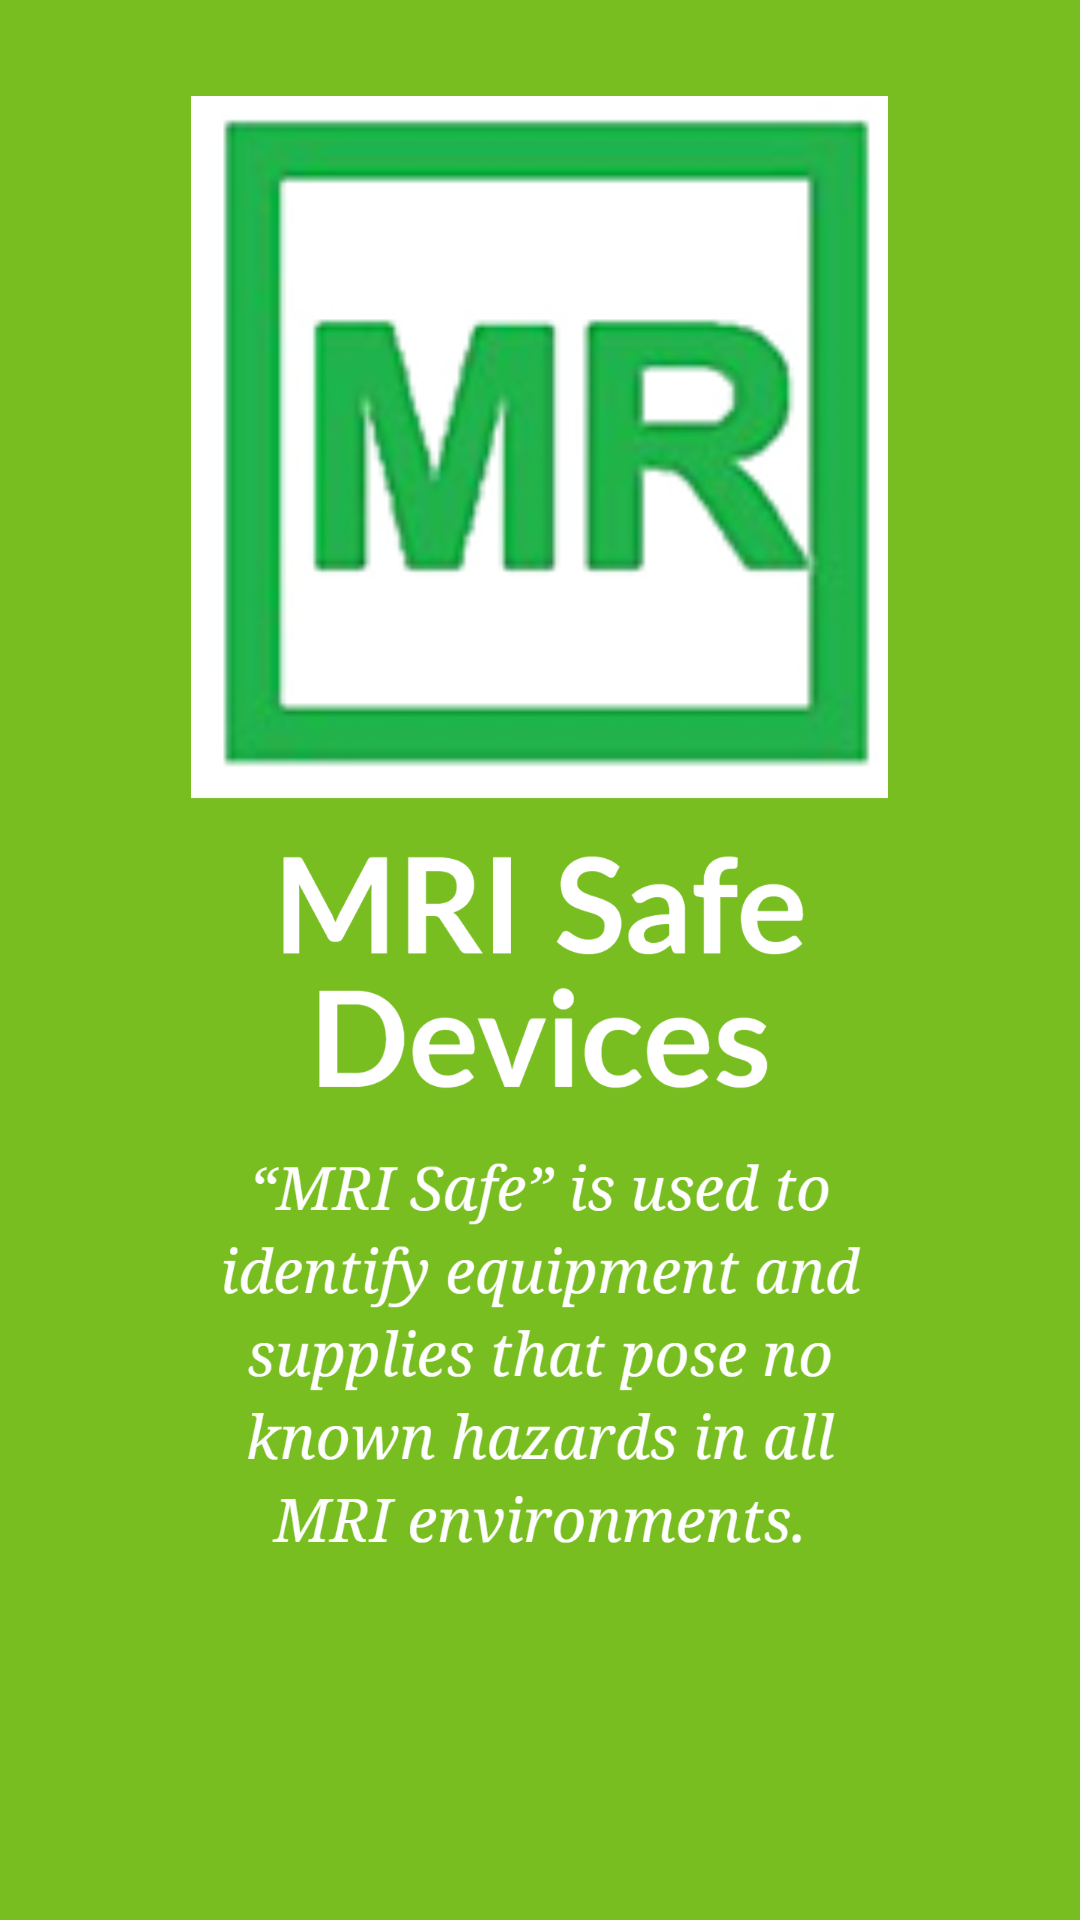 Solid "go" green color background with "MR" in green surrounded by a green square outline. Underneath in large print "MRI Safe Devices" and than in smaller print “MRI Safe is used to identify equipment and supplies that pose no known hazards in all MRI environments."